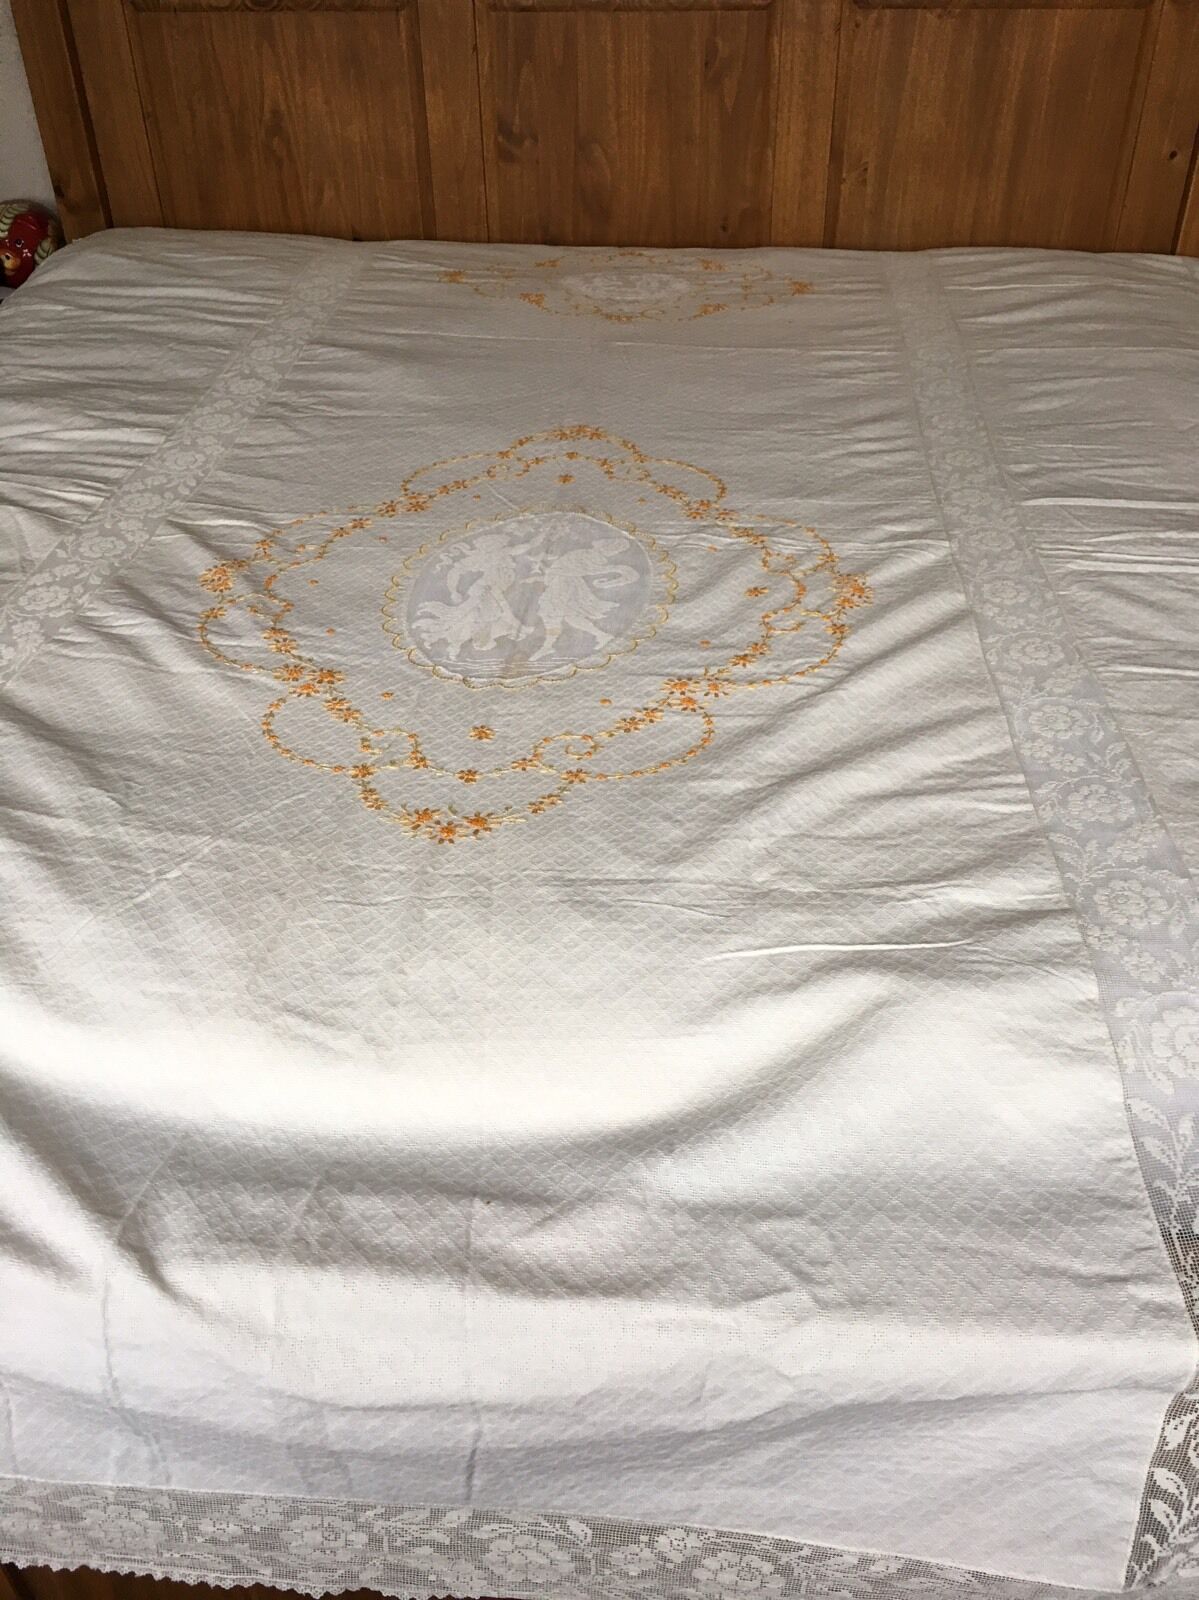 VICTORIAN EMBROIDERED LACE WEDDING BEDSPREAD TAPESTRY COVERLET CHERUBS & LOVERS